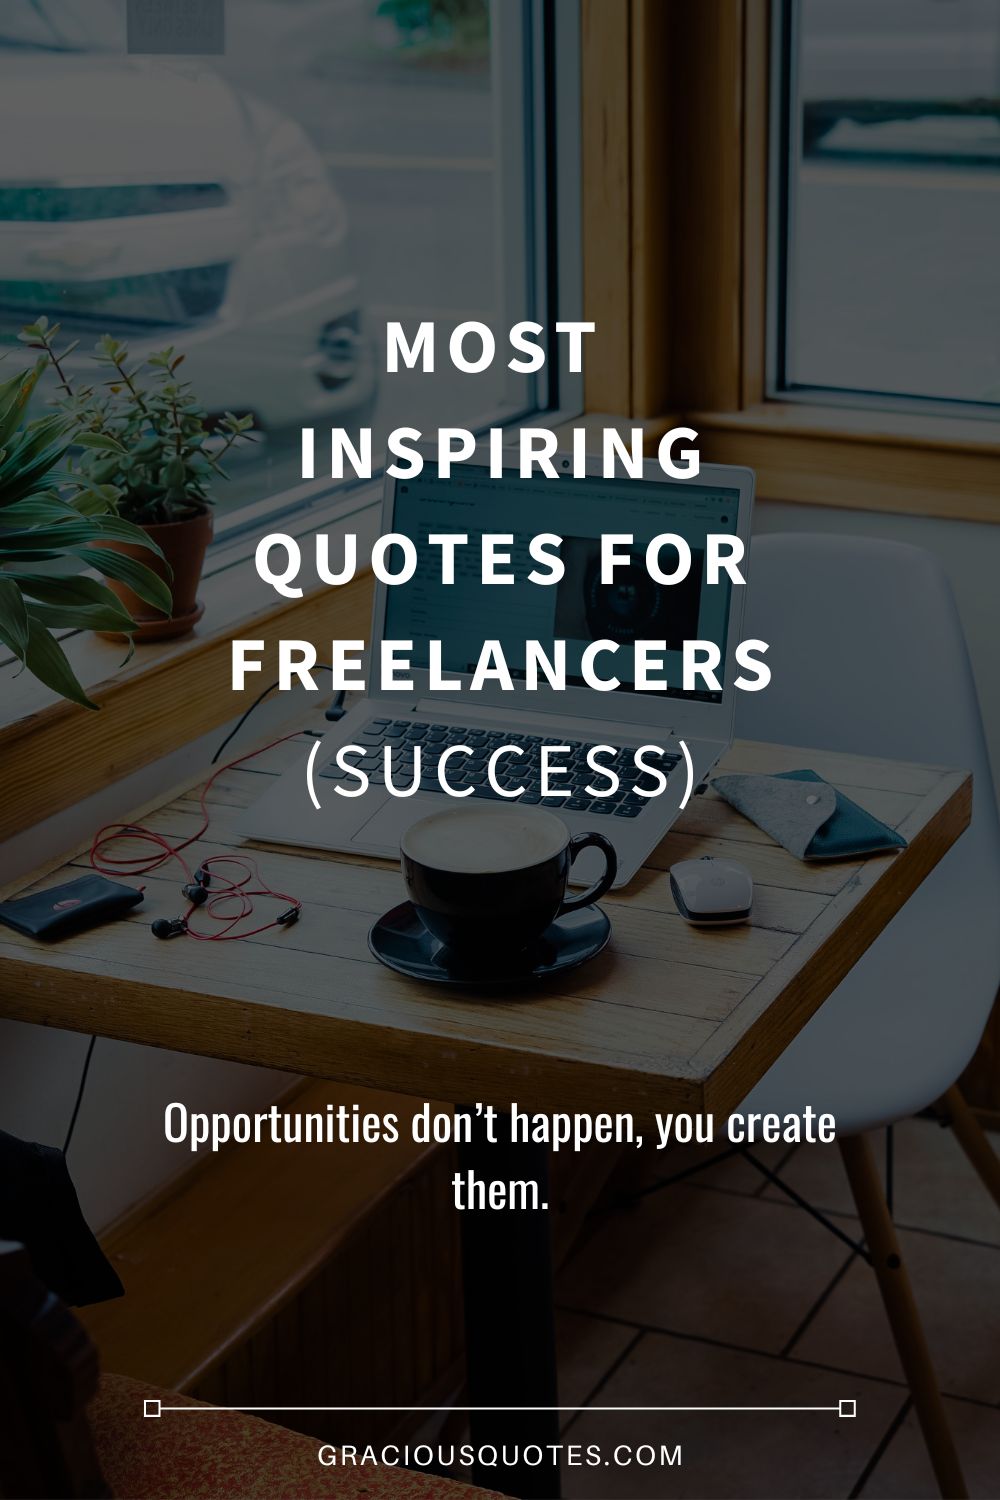 Most Inspiring Quotes for Freelancers (SUCCESS) - Gracious Quotes